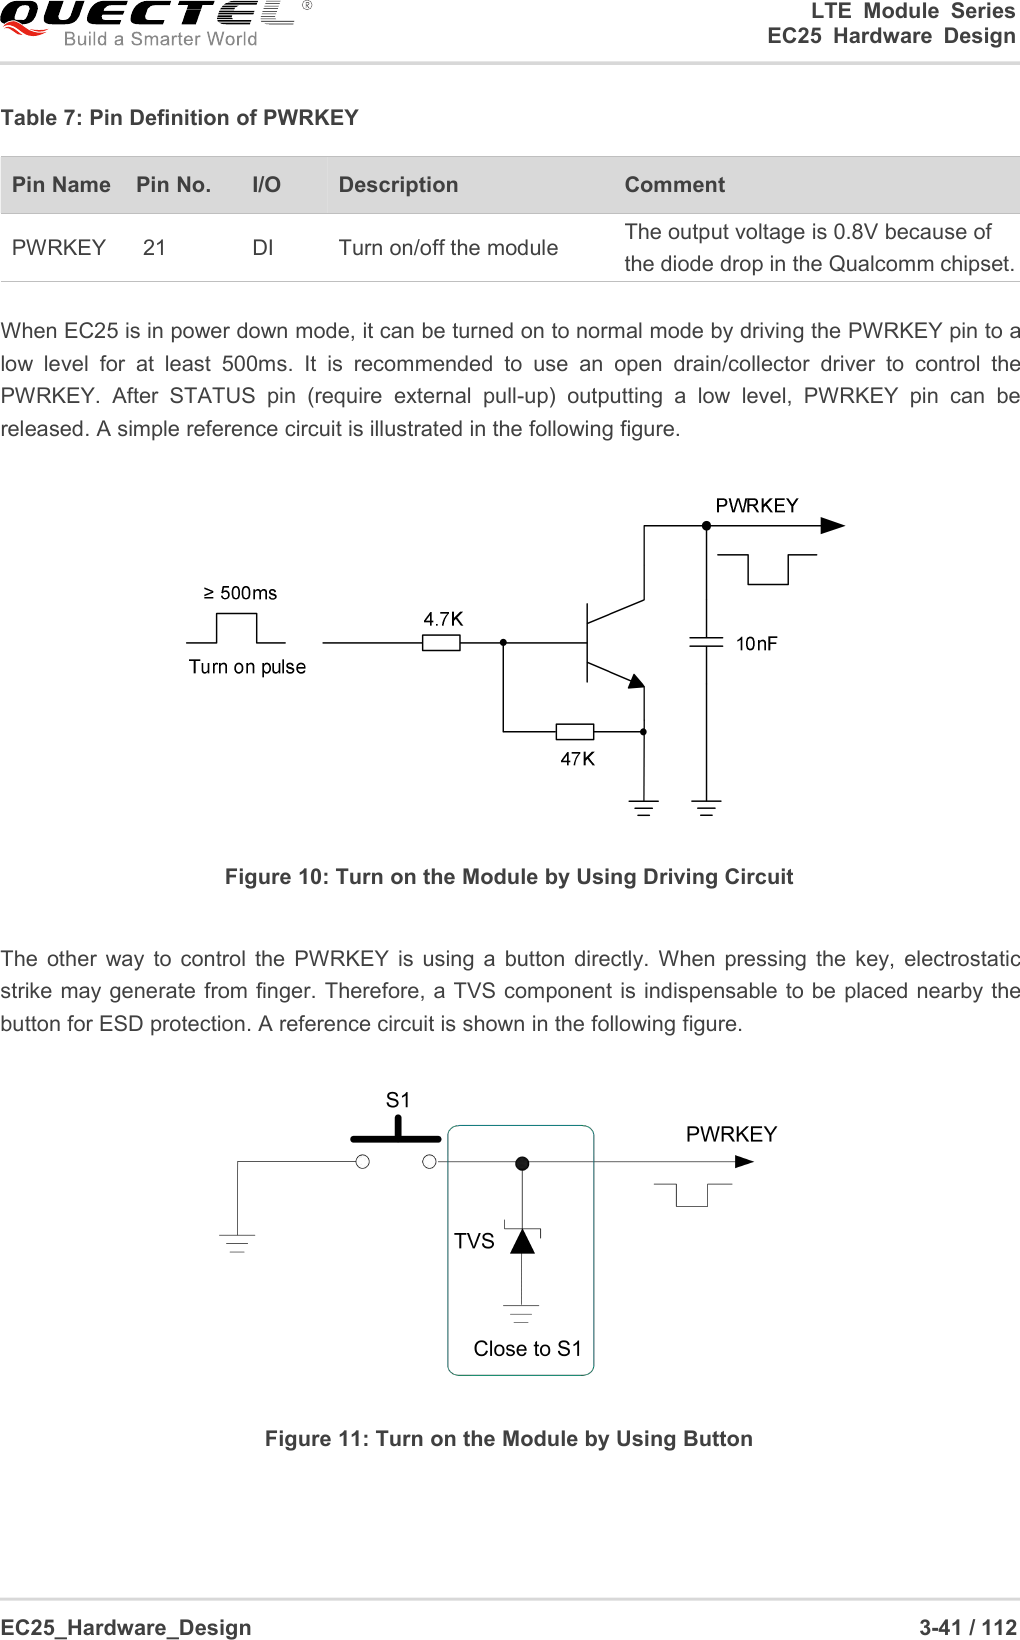 LTE Module SeriesEC25 Hardware DesignEC25_Hardware_Design 3-41 / 112Table 7: Pin Definition of PWRKEYWhen EC25 is in power down mode, it can be turned on to normal mode by driving the PWRKEY pin to alow level for at least 500ms. It is recommended to use an open drain/collector driver to control thePWRKEY. After STATUS pin (require external pull-up) outputting a low level, PWRKEY pin can bereleased. A simple reference circuit is illustrated in the following figure.Figure 10: Turn on the Module by Using Driving CircuitThe other way to control the PWRKEY is using a button directly. When pressing the key, electrostaticstrike may generate from finger. Therefore, a TVS component is indispensable to be placed nearby thebutton for ESD protection. A reference circuit is shown in the following figure.Figure 11: Turn on the Module by Using ButtonPin NamePin No.I/ODescriptionCommentPWRKEY21DITurn on/off the moduleThe output voltage is 0.8V because ofthe diode drop in the Qualcomm chipset.